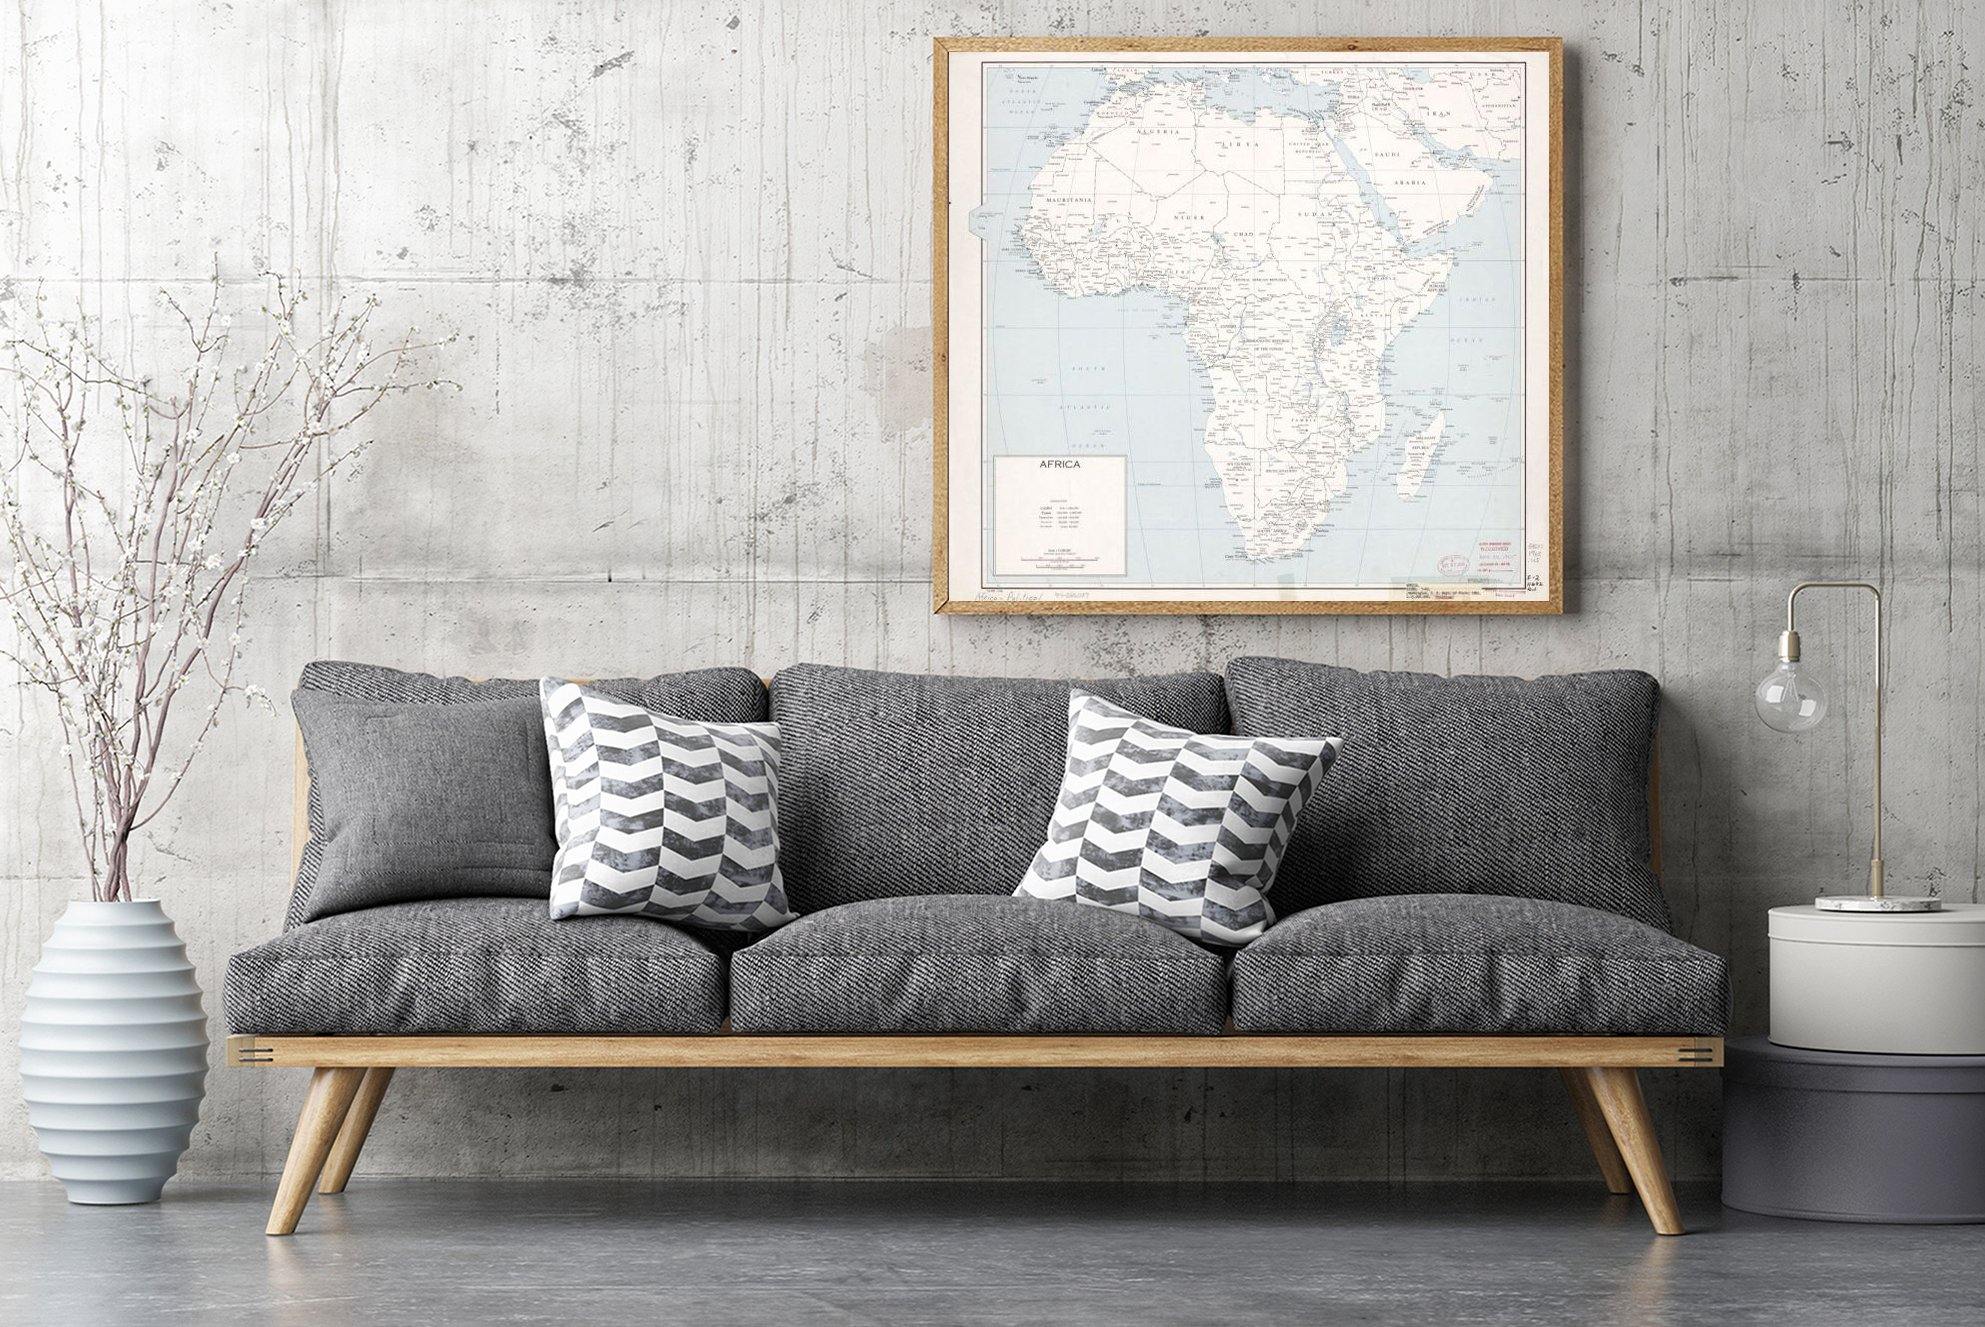 1965 Map| Africa| Africa Map Size: 22 inches x 24 inches |Fits 22x24 s - New York Map Company